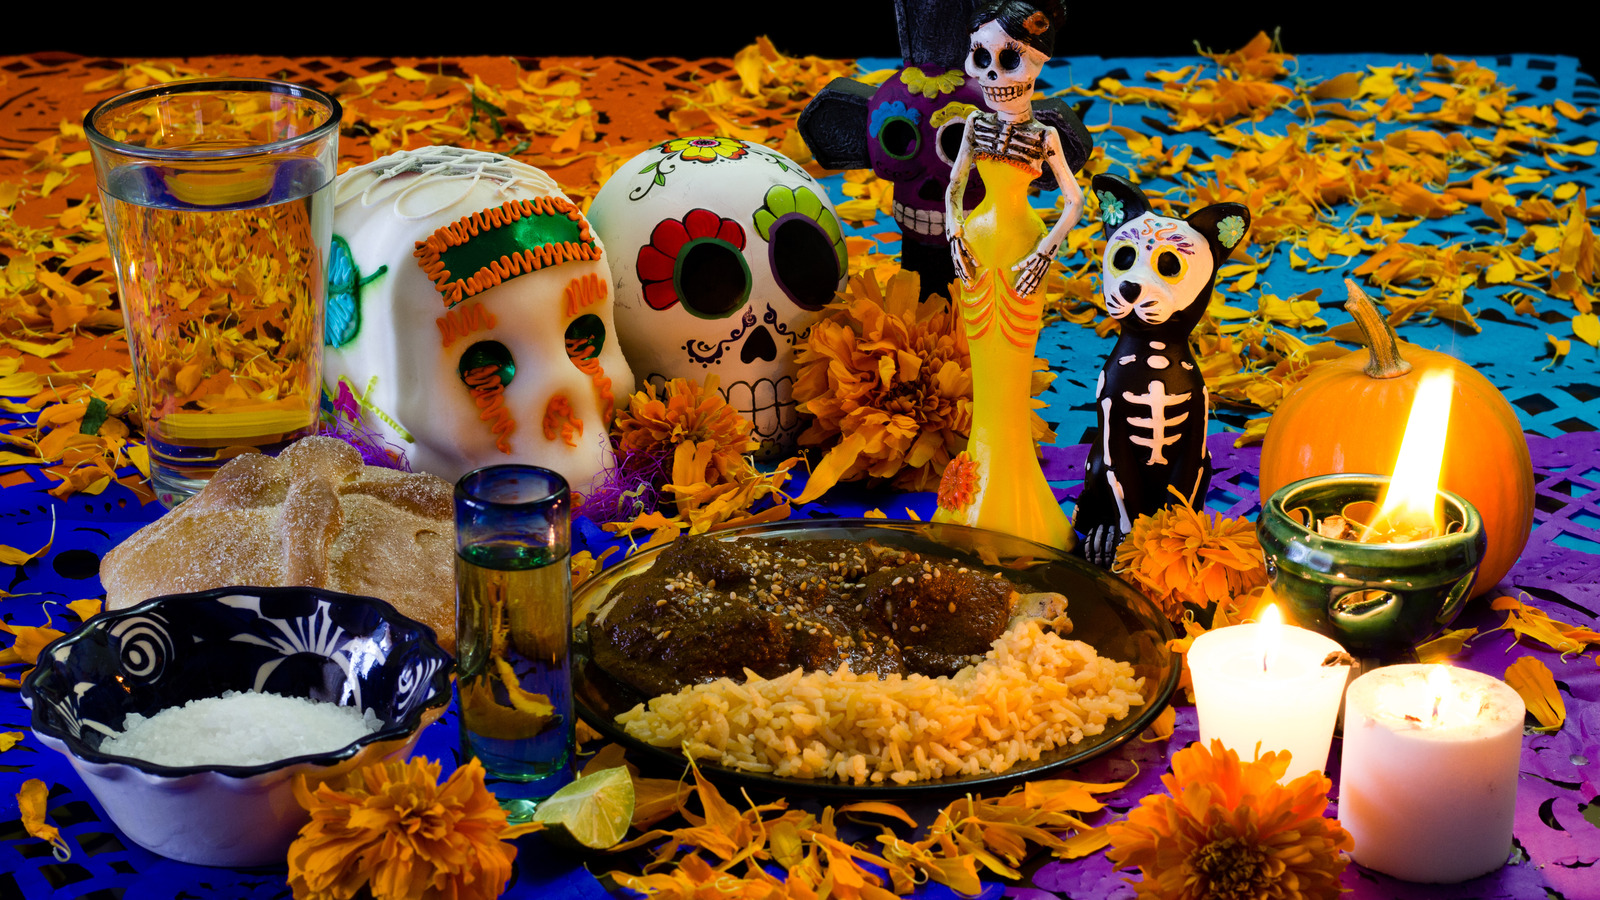 The Mouth-Watering Sauce Traditionally Eaten On Dia De Los Muertos - Daily Meal